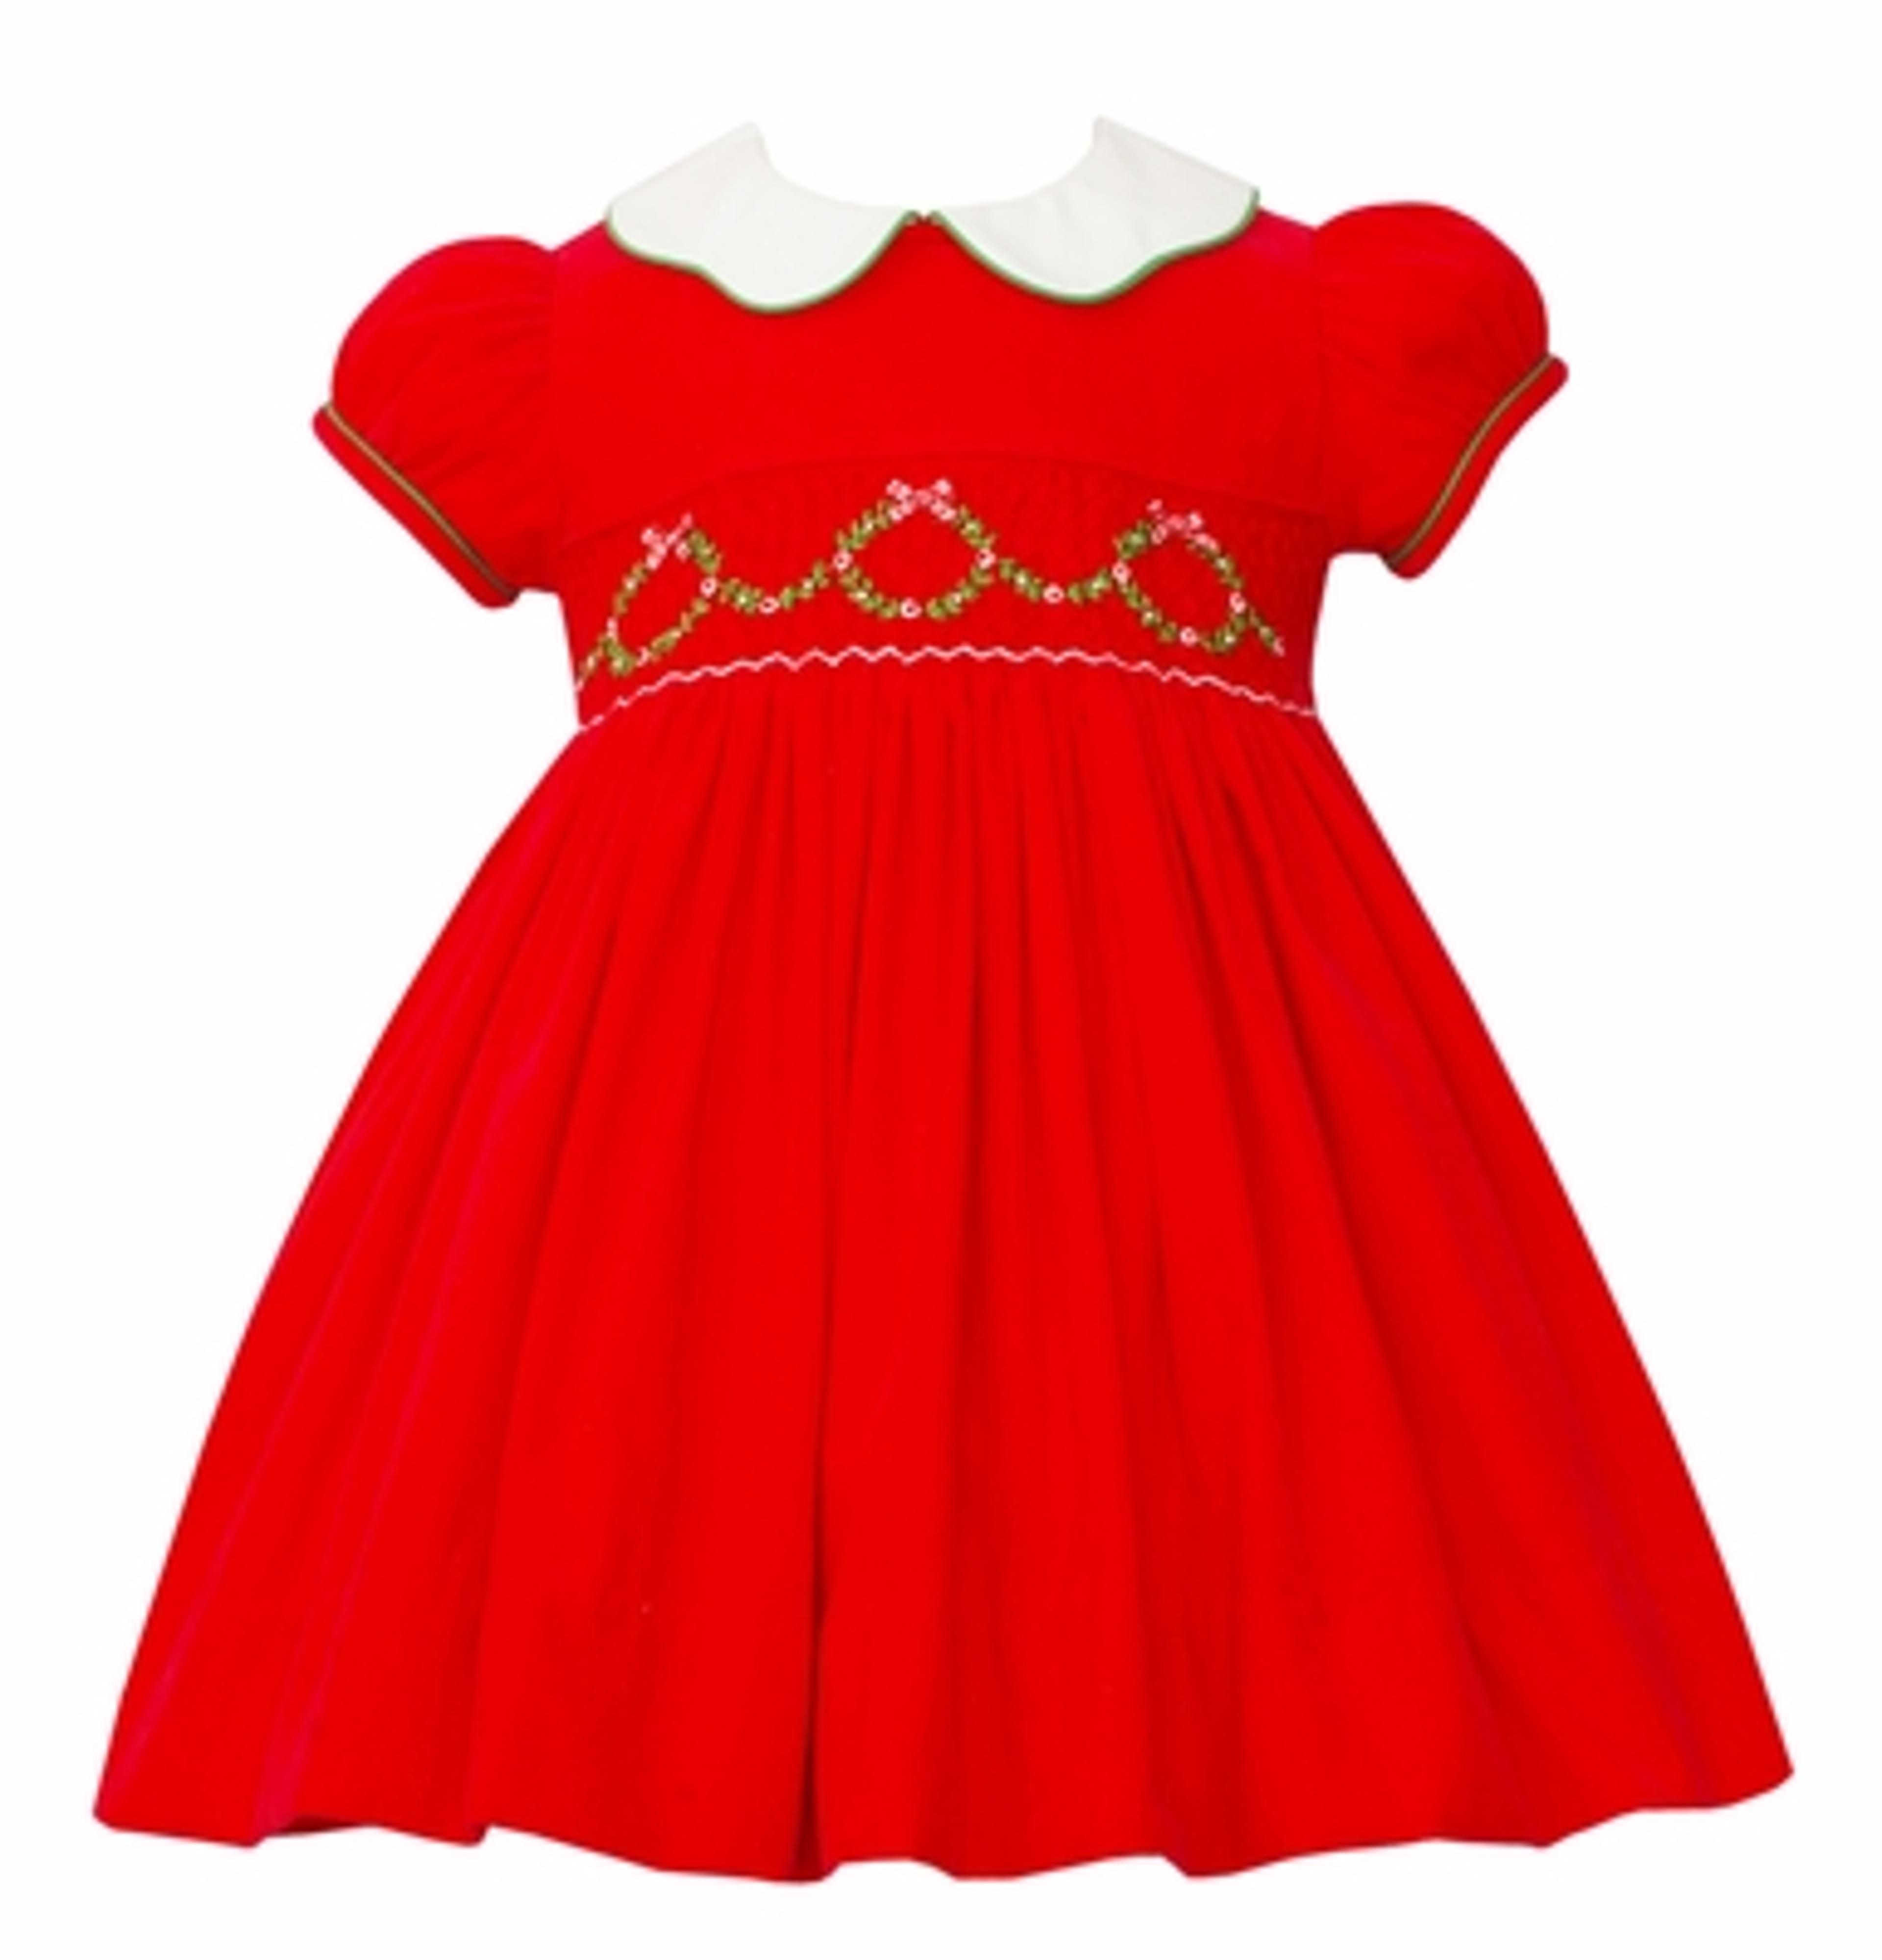 Smocked Collared Dress for Baby Girl and Toddler